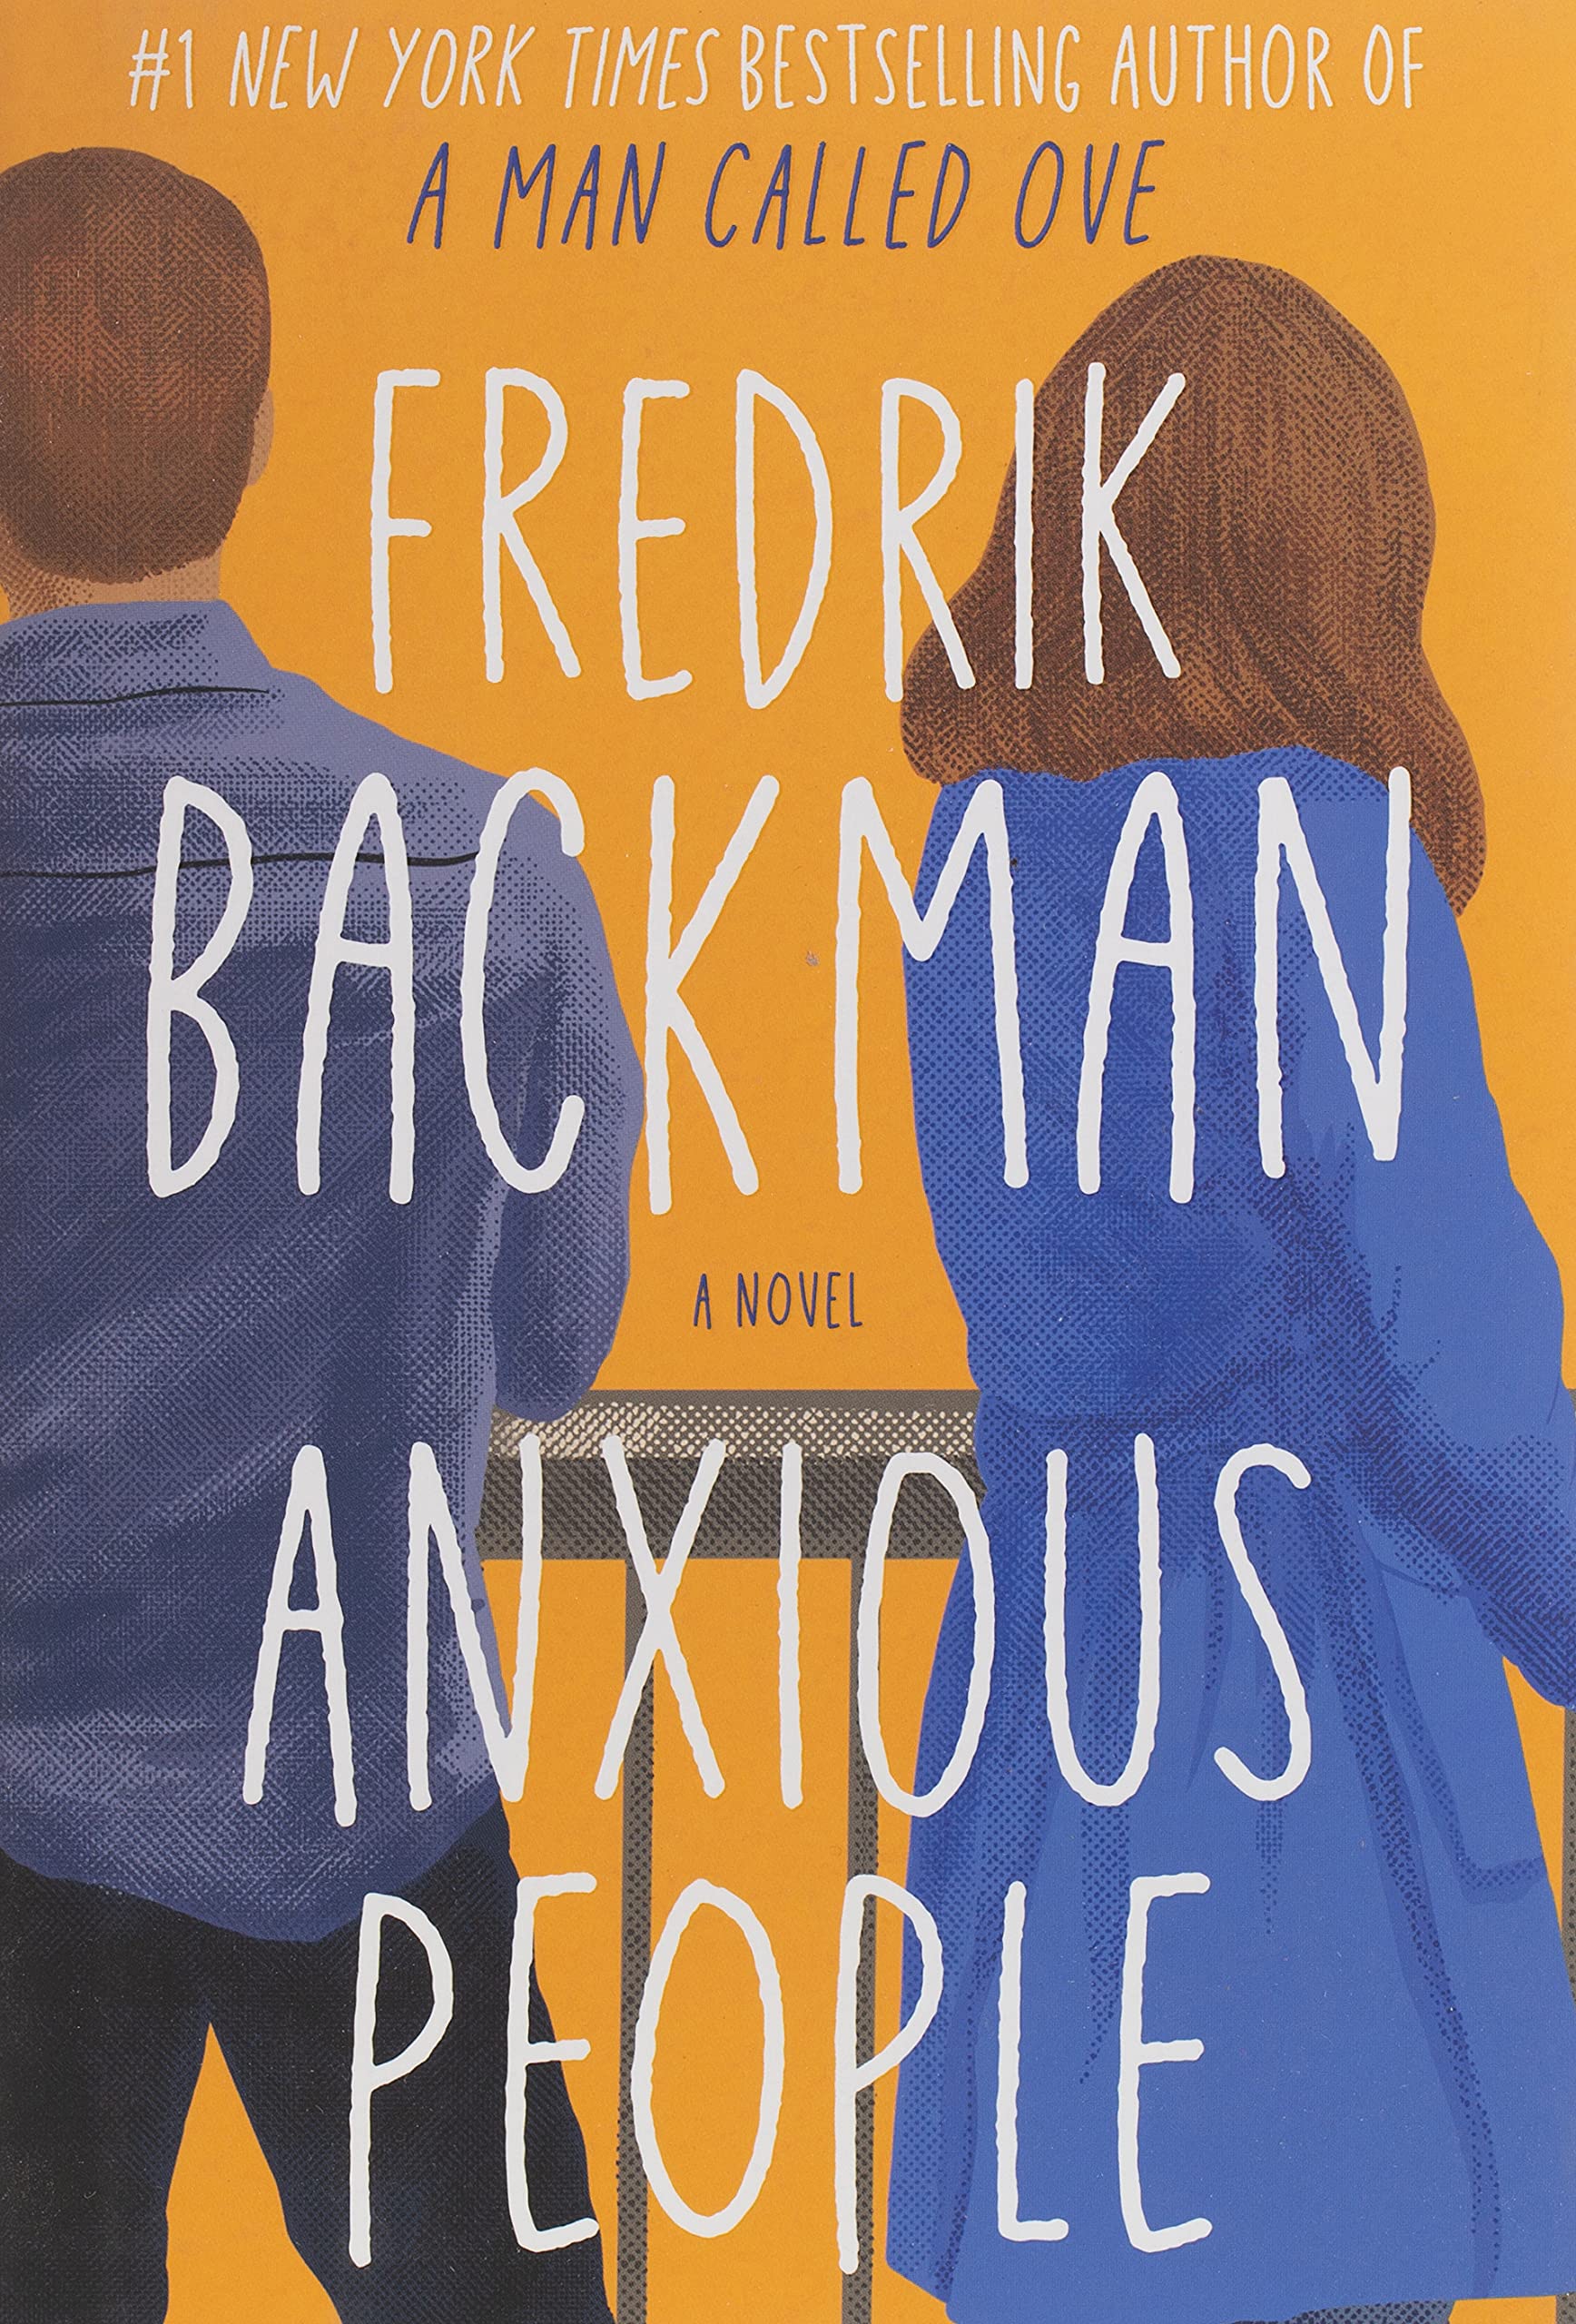 Cover of "Anxious People" by Frederik Backman